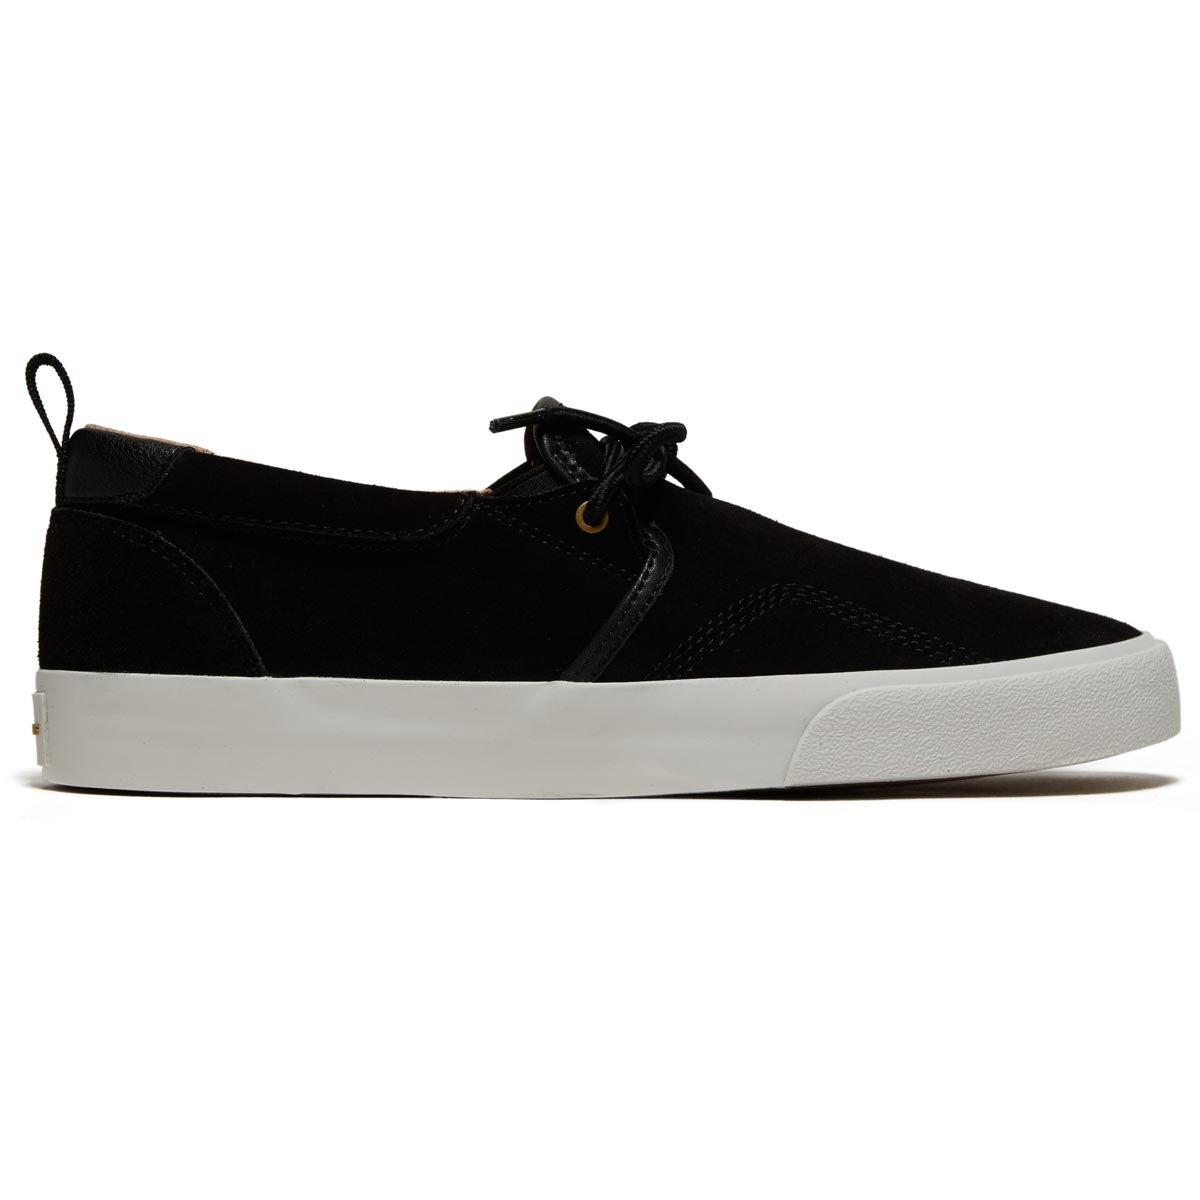 Hours Is Yours Callio S77 Shoes - Black/Off White image 1